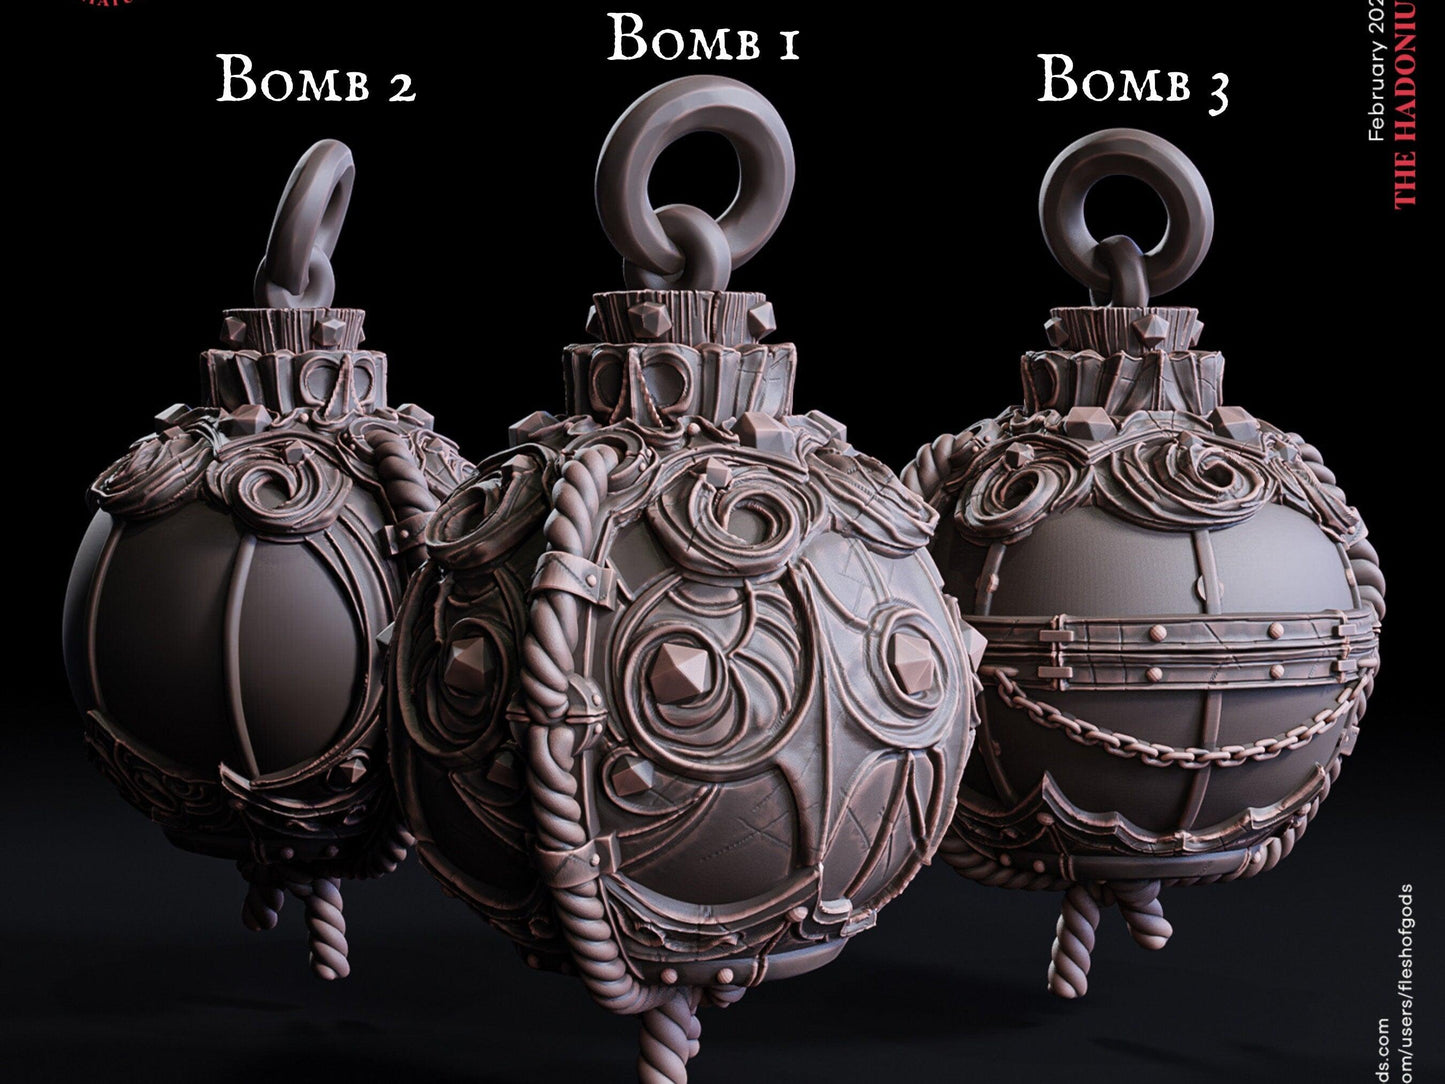 Large Bomb Display Props | Explosive DnD Decor for Display - Plague Miniatures shop for DnD Miniatures